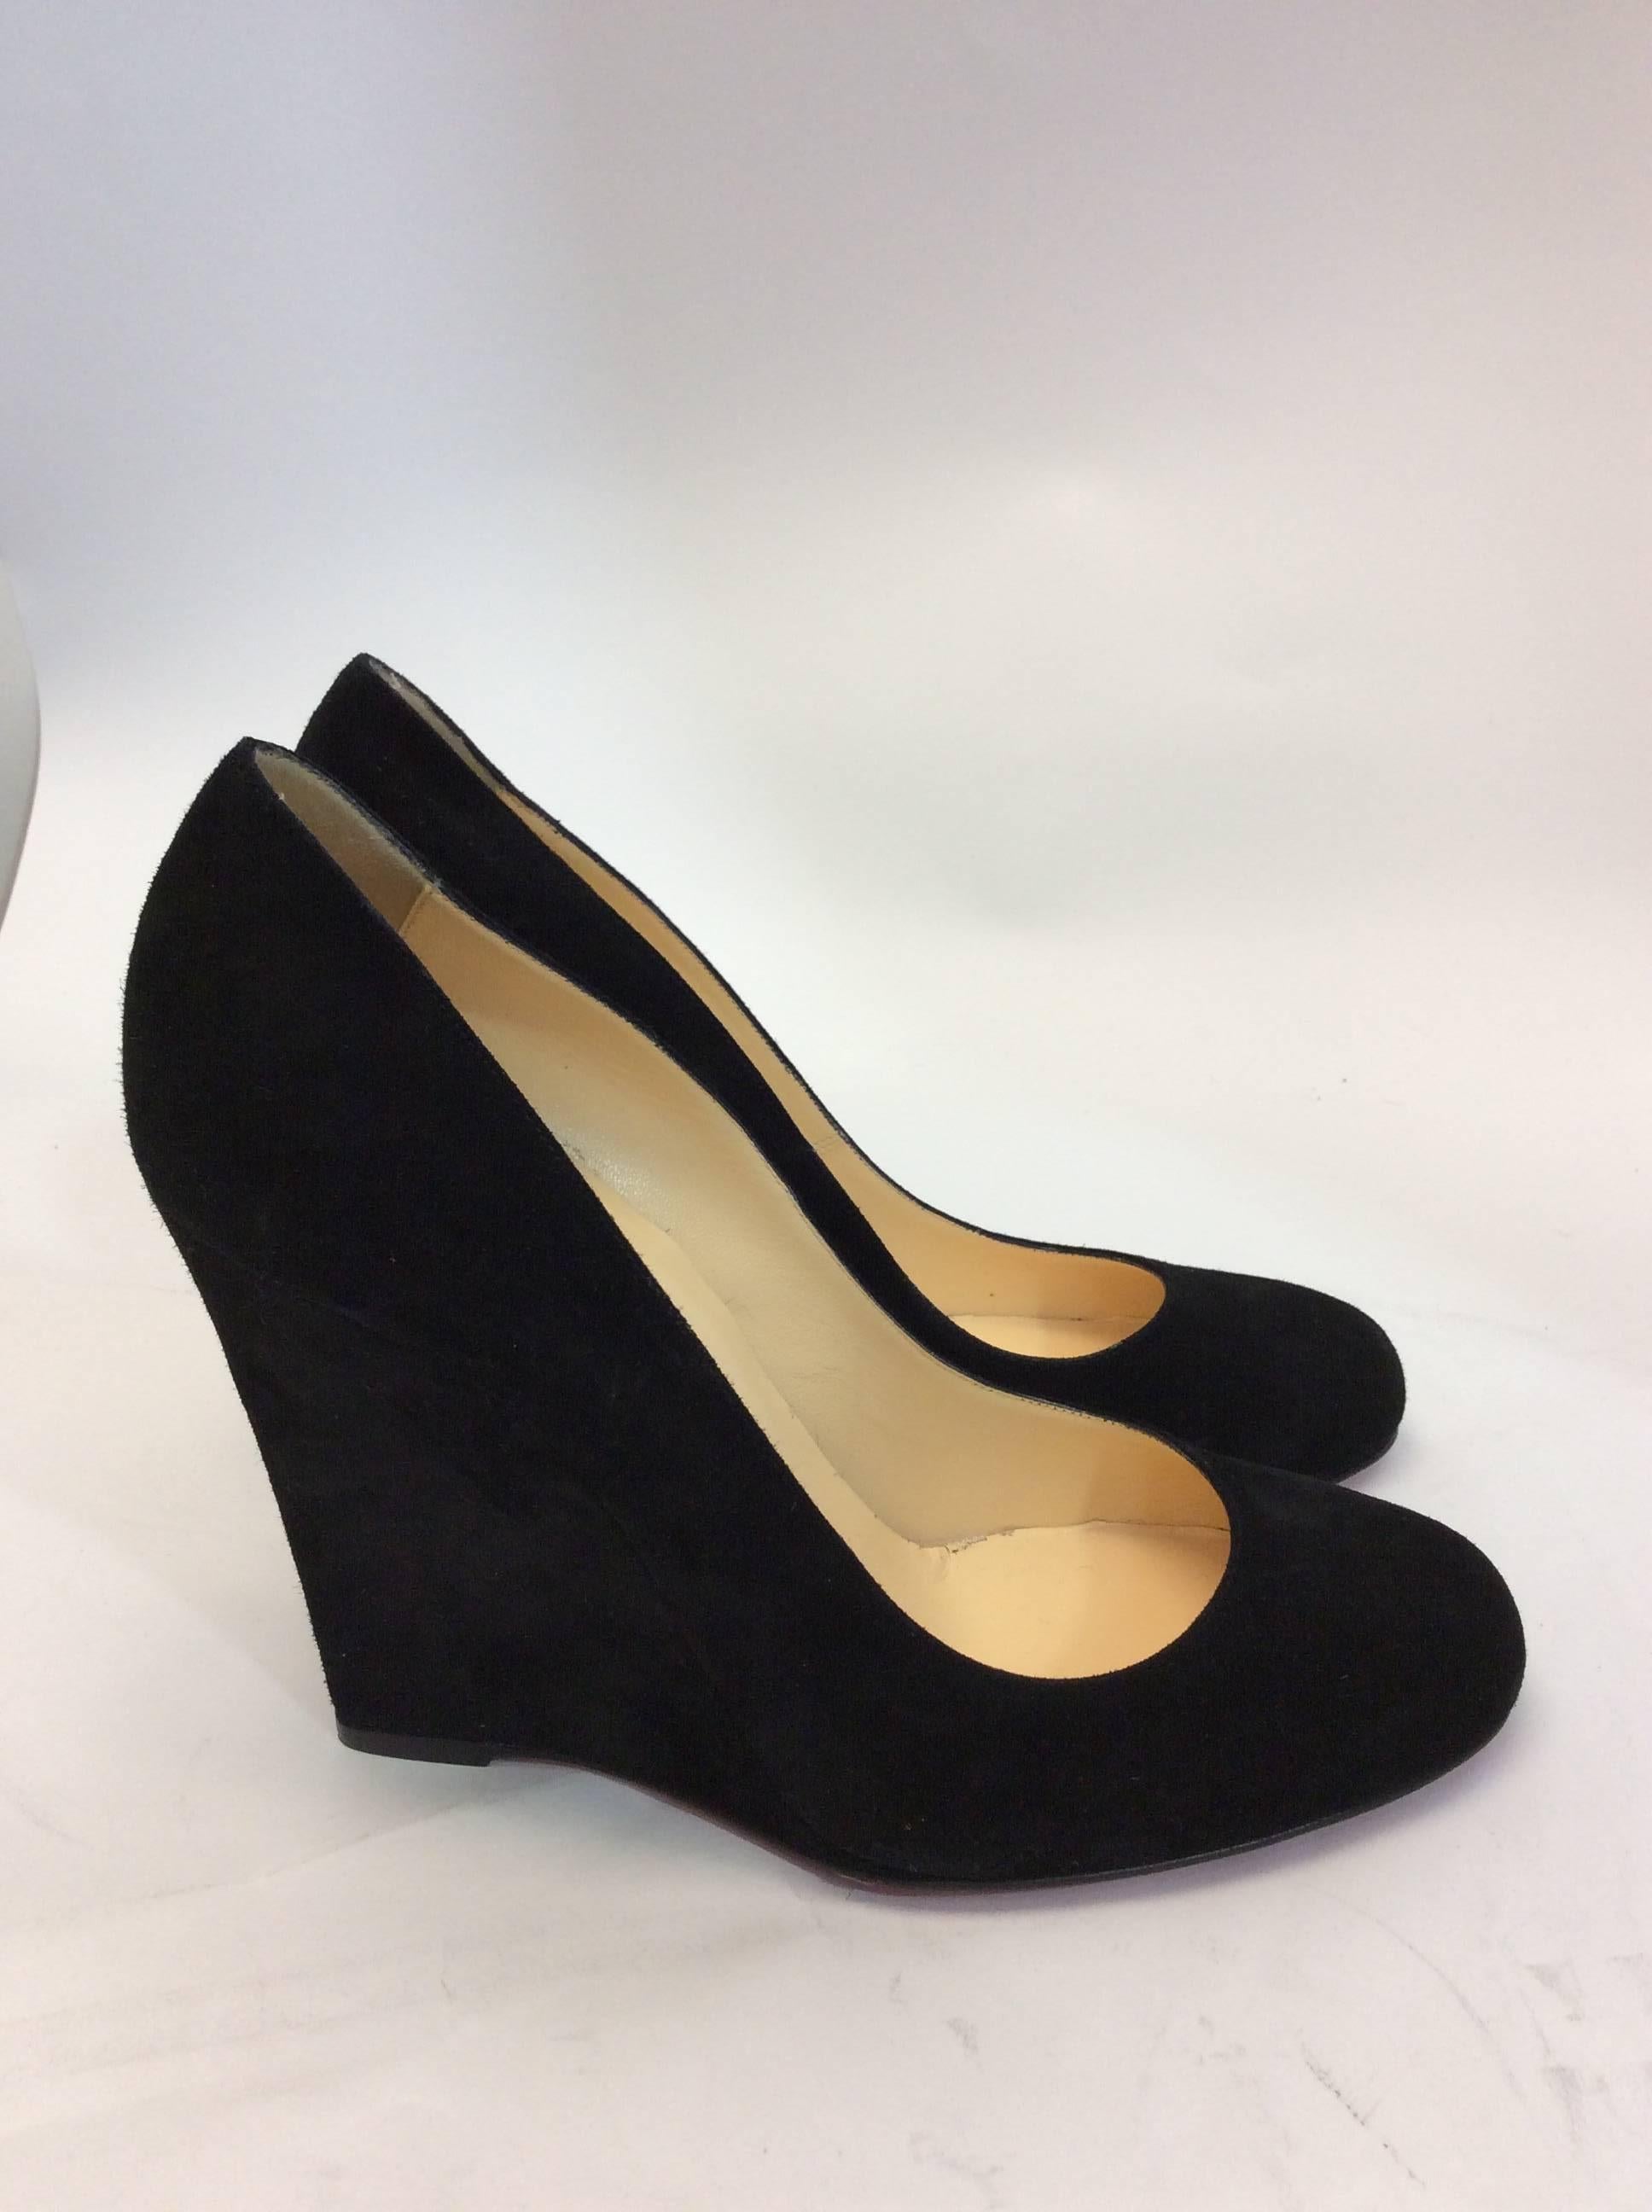 Christian Louboutin Black Suede Wedge In Excellent Condition For Sale In Narberth, PA